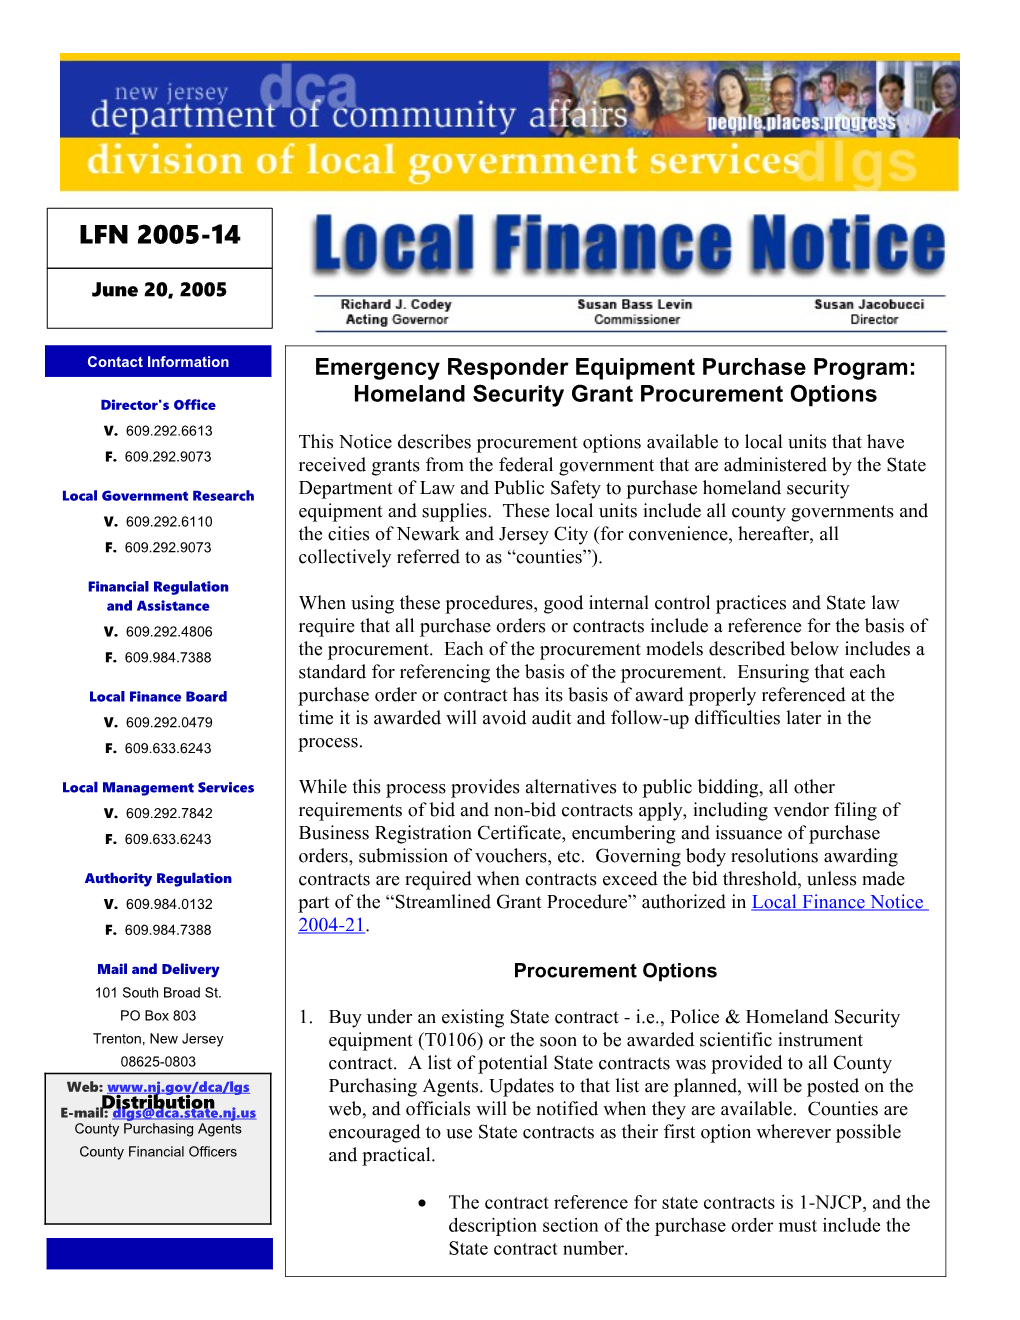 Local Finance Notice 2005-14June 20, 2005Page 1